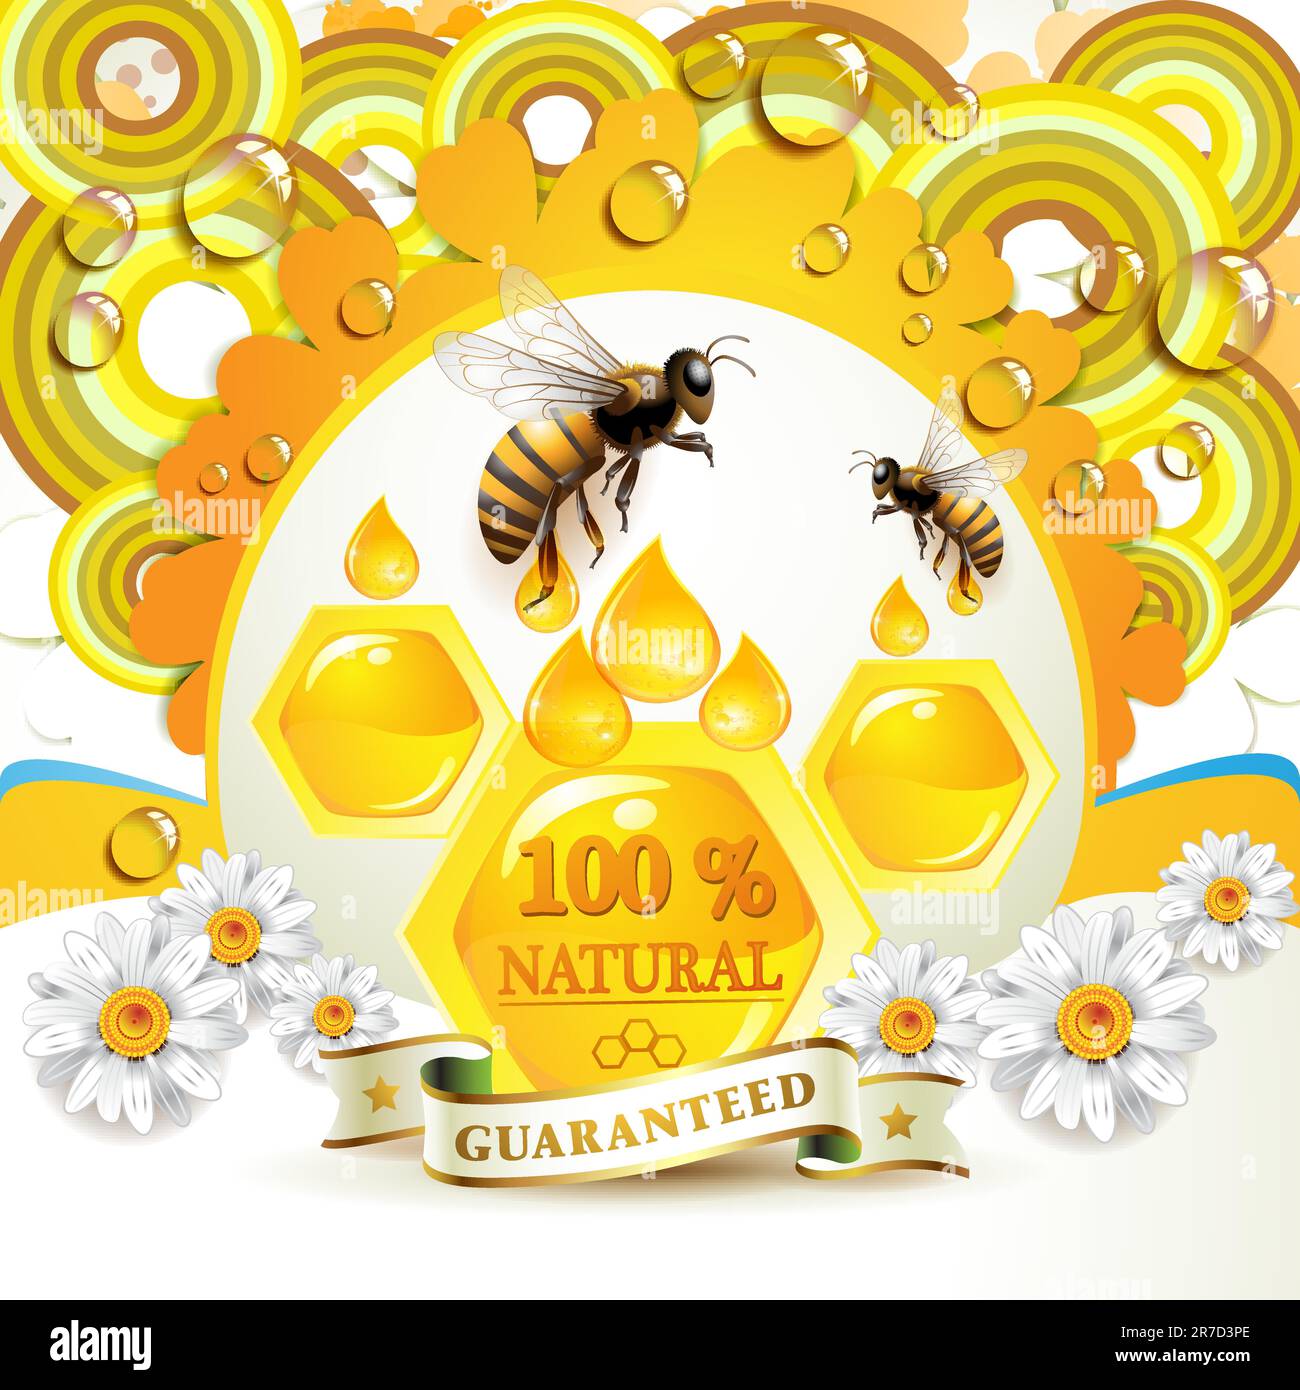 Bees and honeycombs over floral background with drops Stock Vector